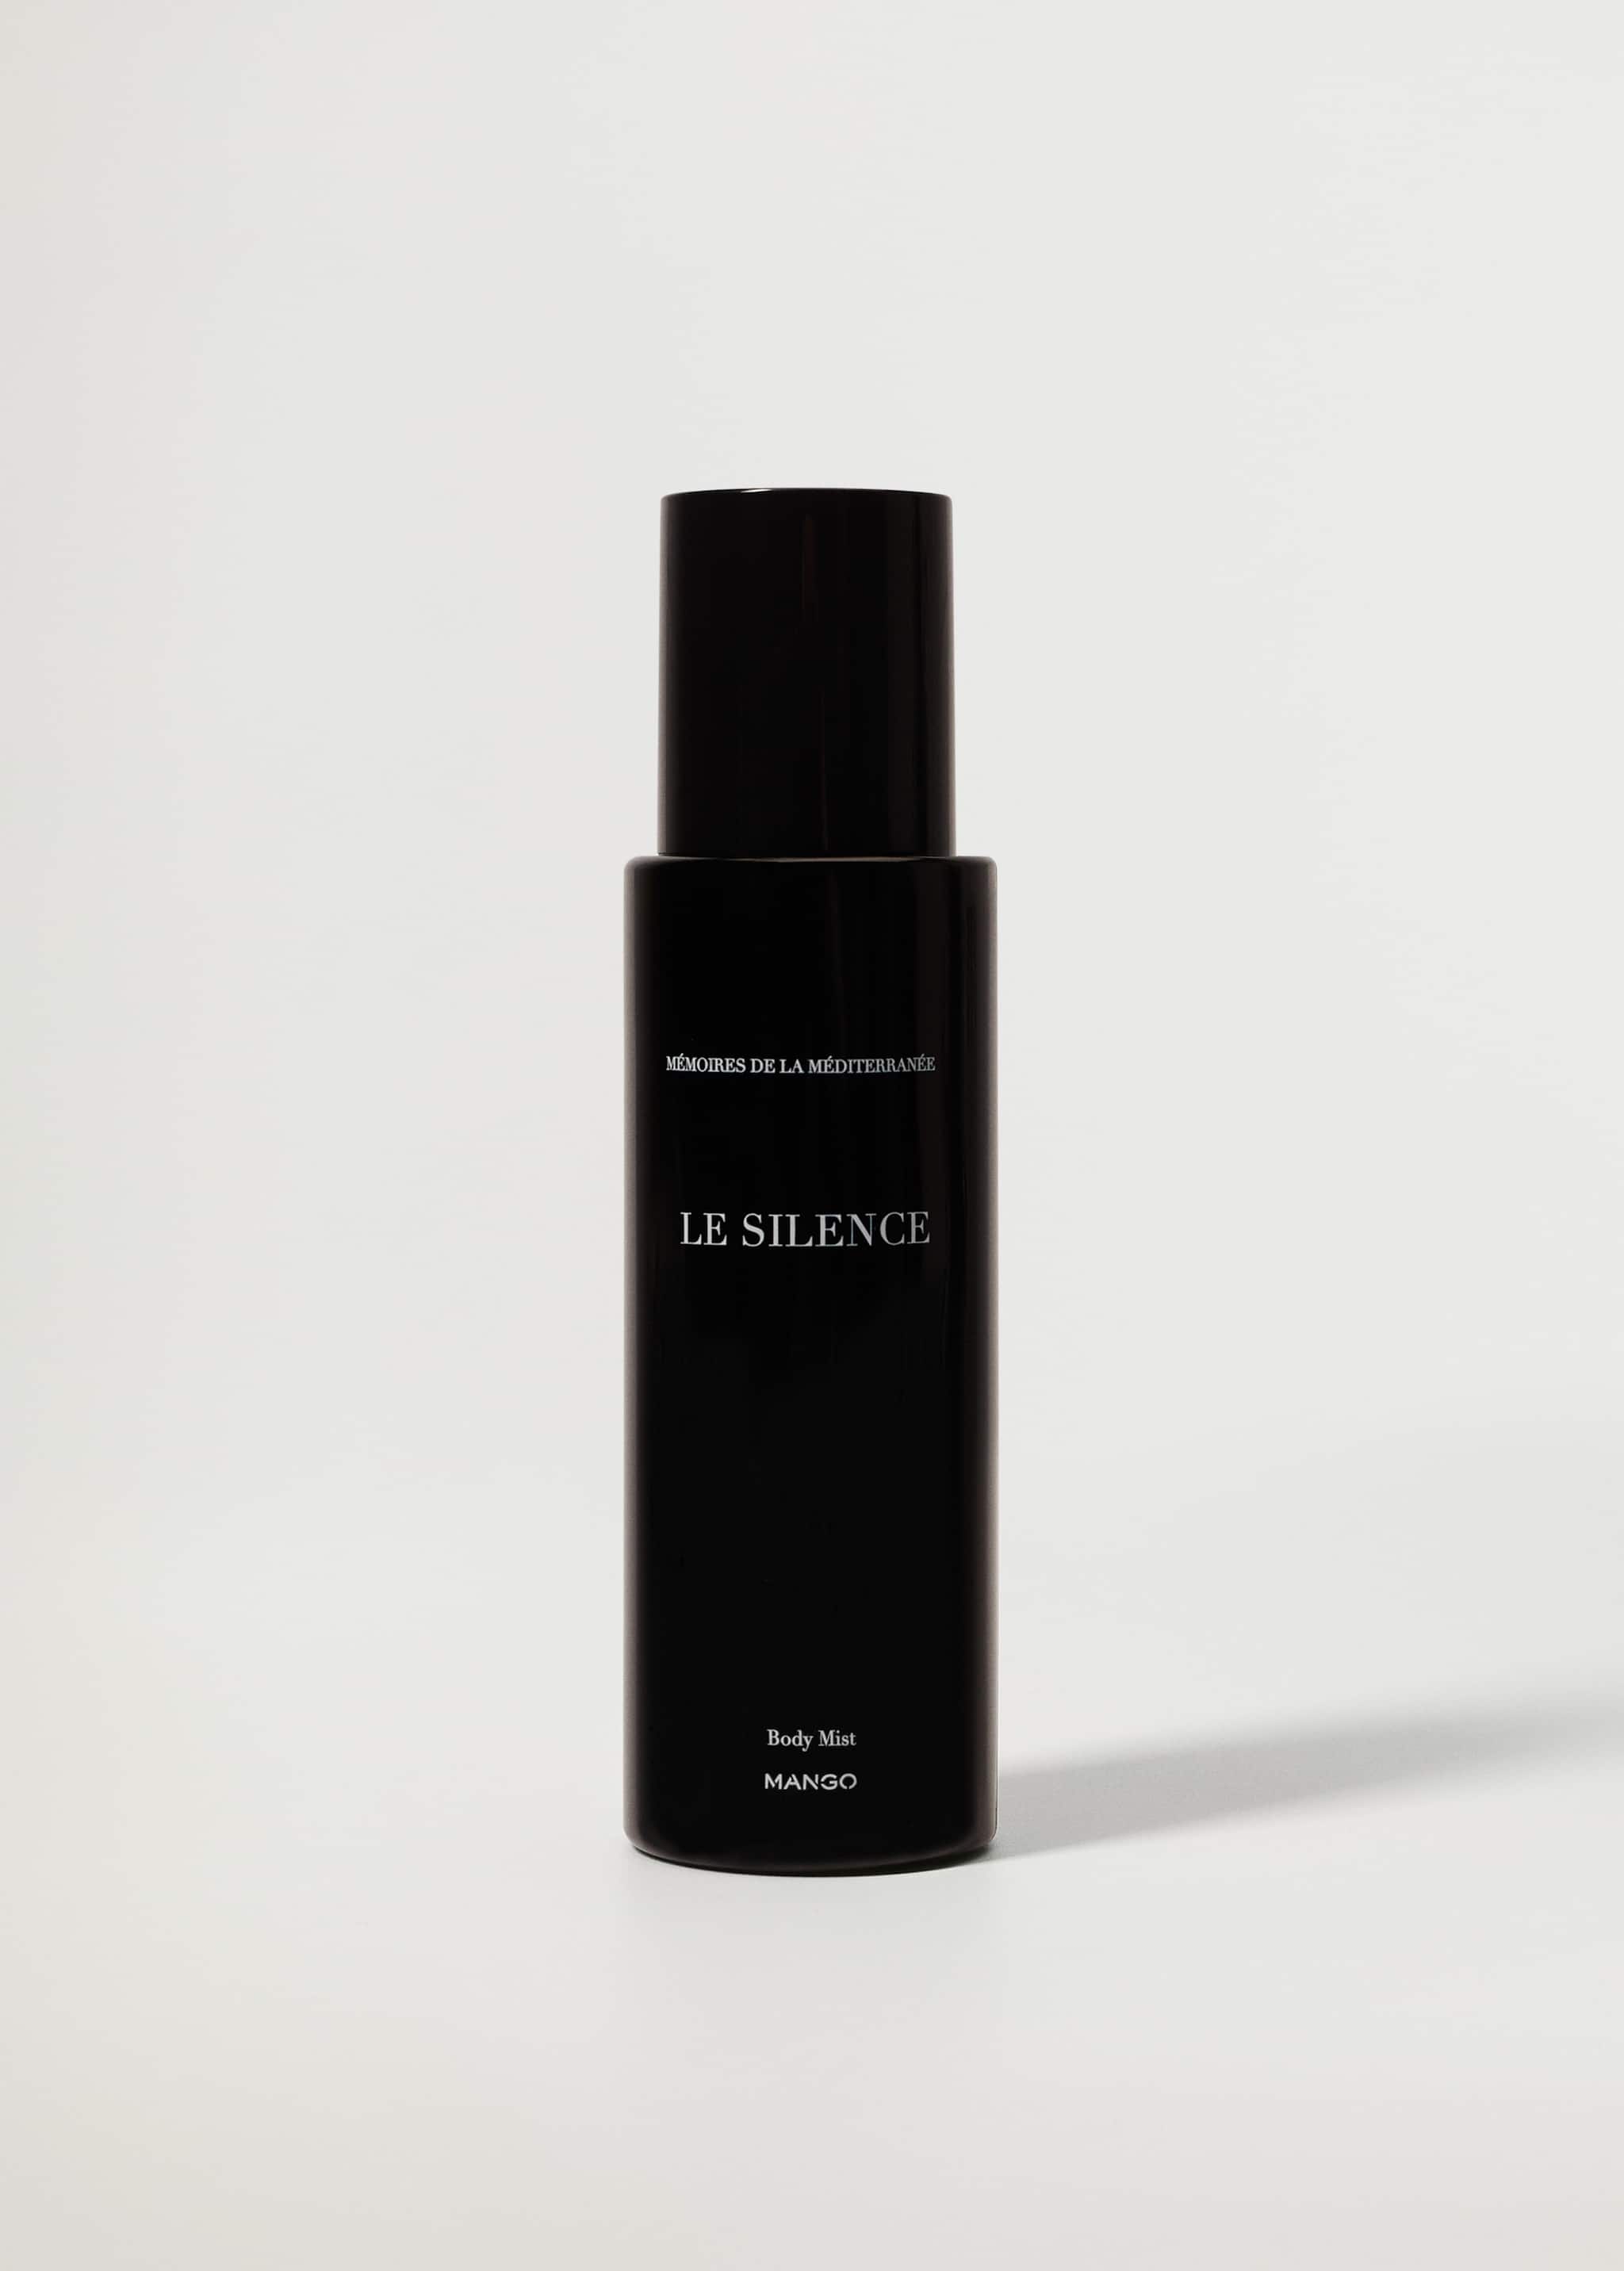 Body Mist Le Silence - Article without model